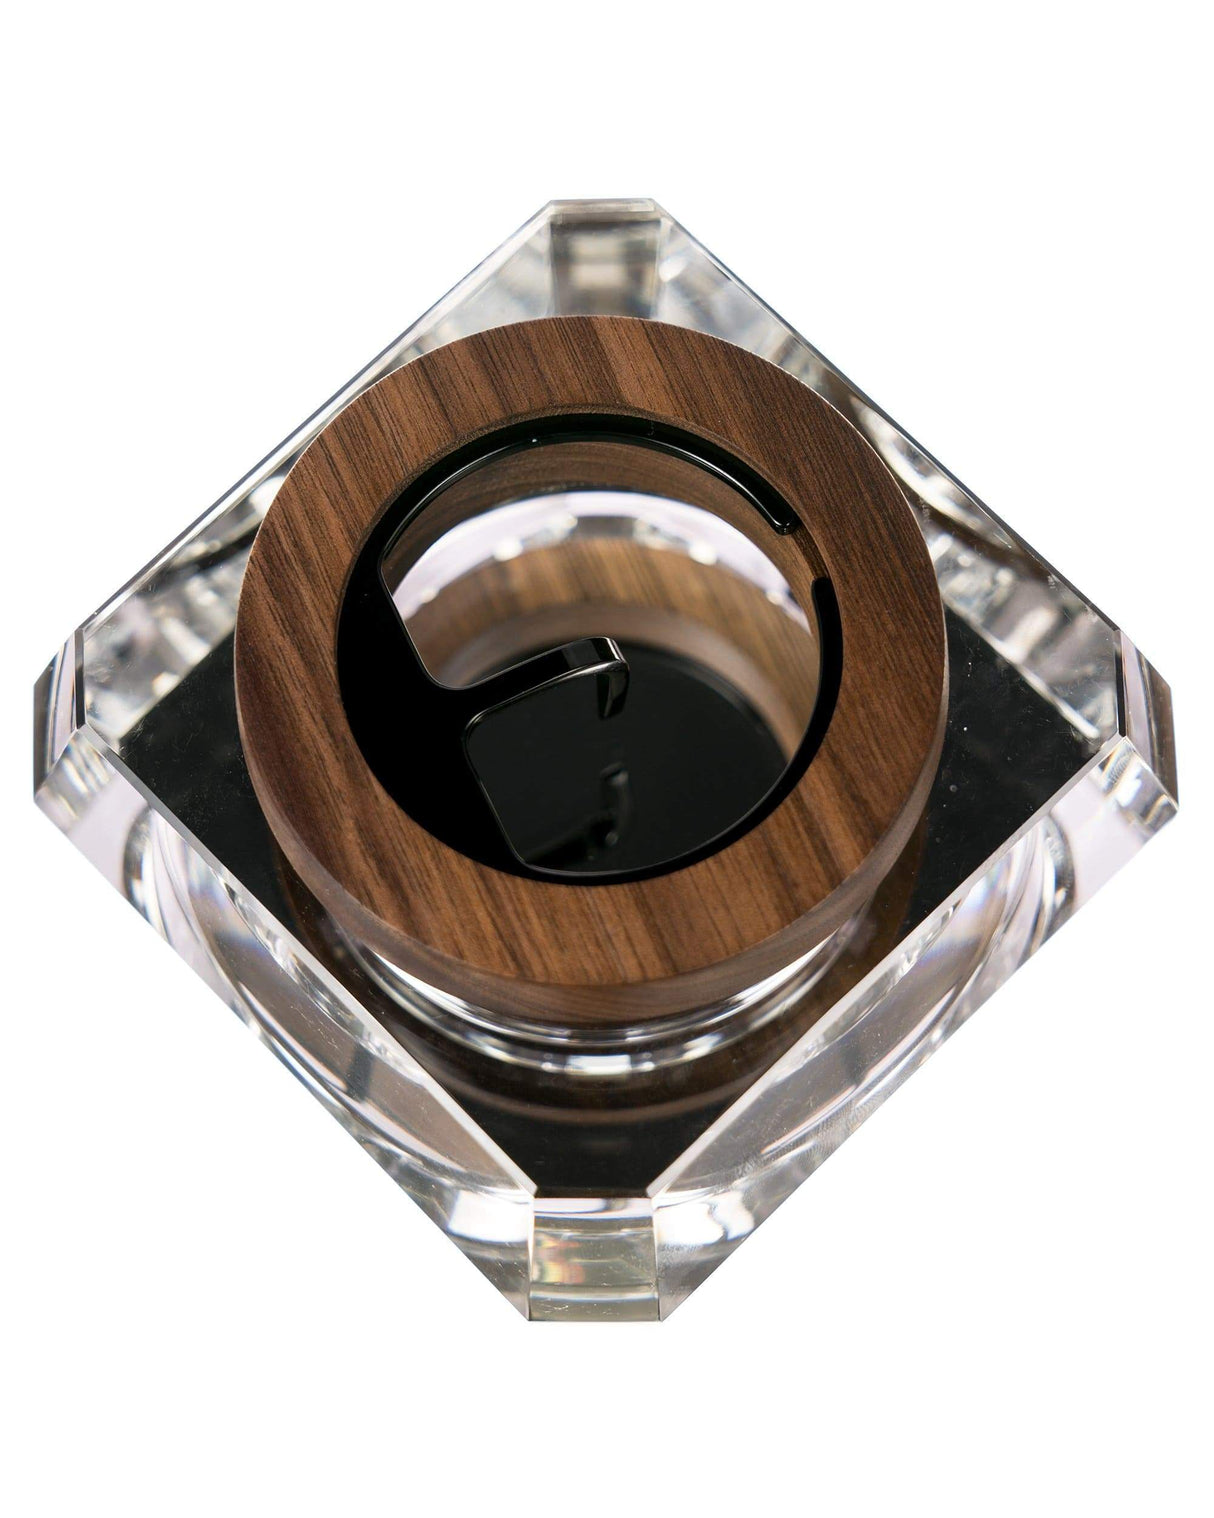 Marley Natural Crystal Ashtray top view, clear borosilicate glass with wooden accent